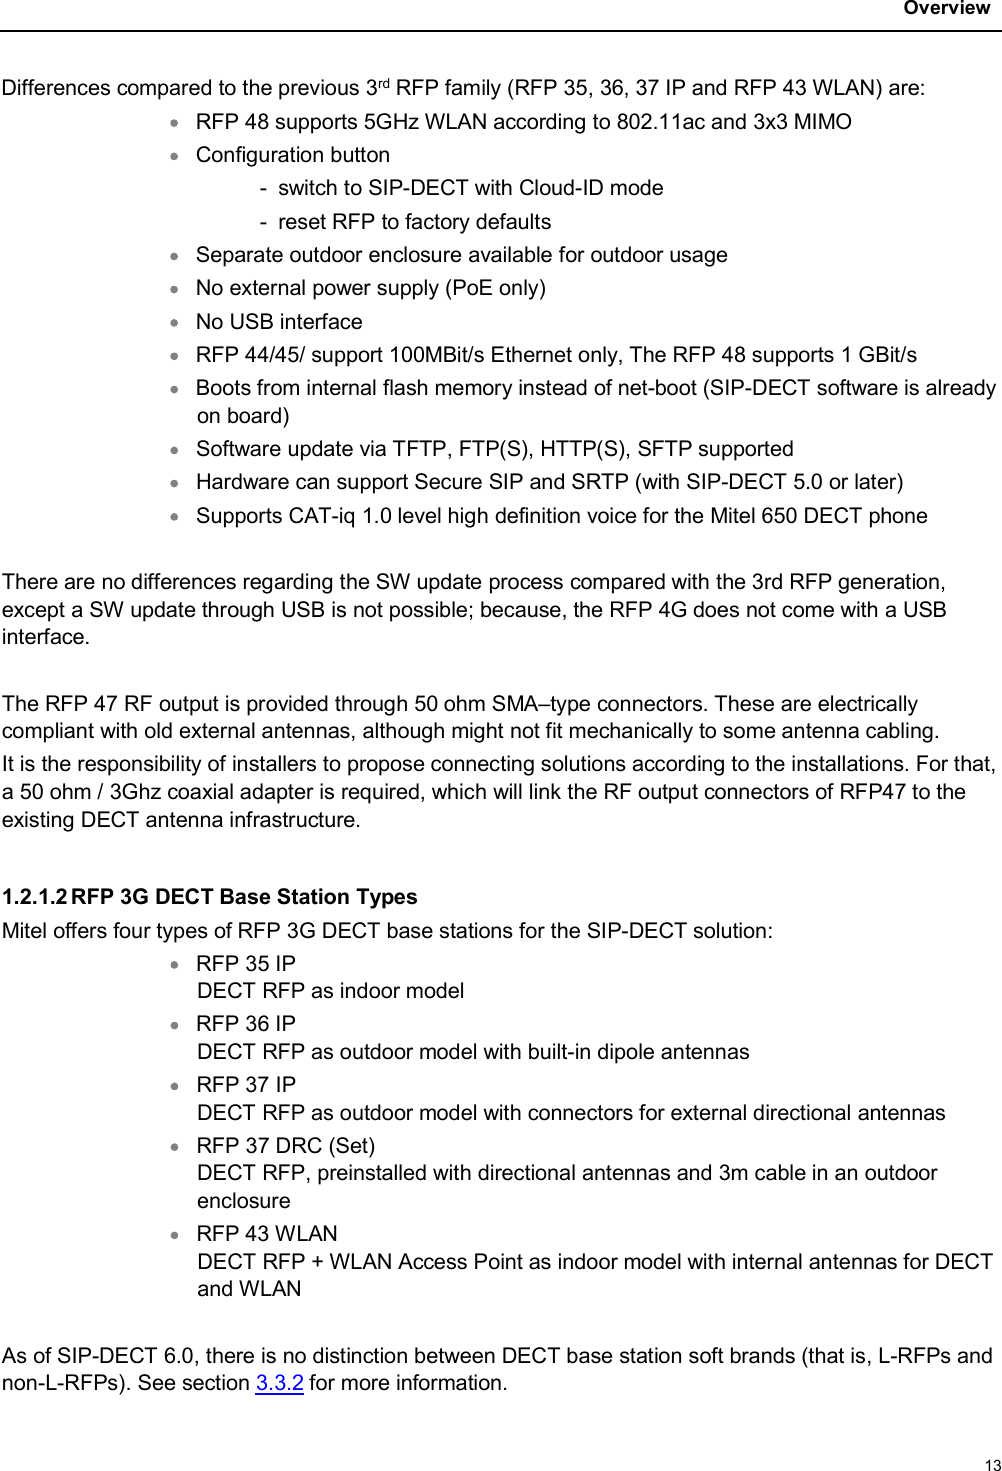 Overview13Differences compared to the previous 3rd RFP family (RFP 35, 36, 37 IP and RFP 43 WLAN) are:RFP 48 supports 5GHz WLAN according to 802.11ac and 3x3 MIMOConfiguration button - switch to SIP-DECT with Cloud-ID mode - reset RFP to factory defaultsSeparate outdoor enclosure available for outdoor usageNo external power supply (PoE only)No USB interfaceRFP 44/45/ support 100MBit/s Ethernet only, The RFP 48 supports 1 GBit/sBoots from internal flash memory instead of net-boot (SIP-DECT software is already on board)Software update via TFTP, FTP(S), HTTP(S), SFTP supportedHardware can support Secure SIP and SRTP (with SIP-DECT 5.0 or later)Supports CAT-iq 1.0 level high definition voice for the Mitel 650 DECT phoneThere are no differences regarding the SW update process compared with the 3rd RFP generation, except a SW update through USB is not possible; because, the RFP 4G does not come with a USB interface.The RFP 47 RF output is provided through 50 ohm SMA–type connectors. These are electrically compliant with old external antennas, although might not fit mechanically to some antenna cabling.It is the responsibility of installers to propose connecting solutions according to the installations. For that,a 50 ohm / 3Ghz coaxial adapter is required, which will link the RF output connectors of RFP47 to the existing DECT antenna infrastructure.1.2.1.2 RFP 3G DECT Base Station TypesMitel offers four types of RFP 3G DECT base stations for the SIP-DECT solution:RFP 35 IPDECT RFP as indoor modelRFP 36 IPDECT RFP as outdoor model with built-in dipole antennasRFP 37 IPDECT RFP as outdoor model with connectors for external directional antennasRFP 37 DRC (Set)DECT RFP, preinstalled with directional antennas and 3m cable in an outdoor enclosureRFP 43 WLANDECT RFP + WLAN Access Point as indoor model with internal antennas for DECT and WLANAs of SIP-DECT 6.0, there is no distinction between DECT base station soft brands (that is, L-RFPs and non-L-RFPs). See section 3.3.2 for more information. 